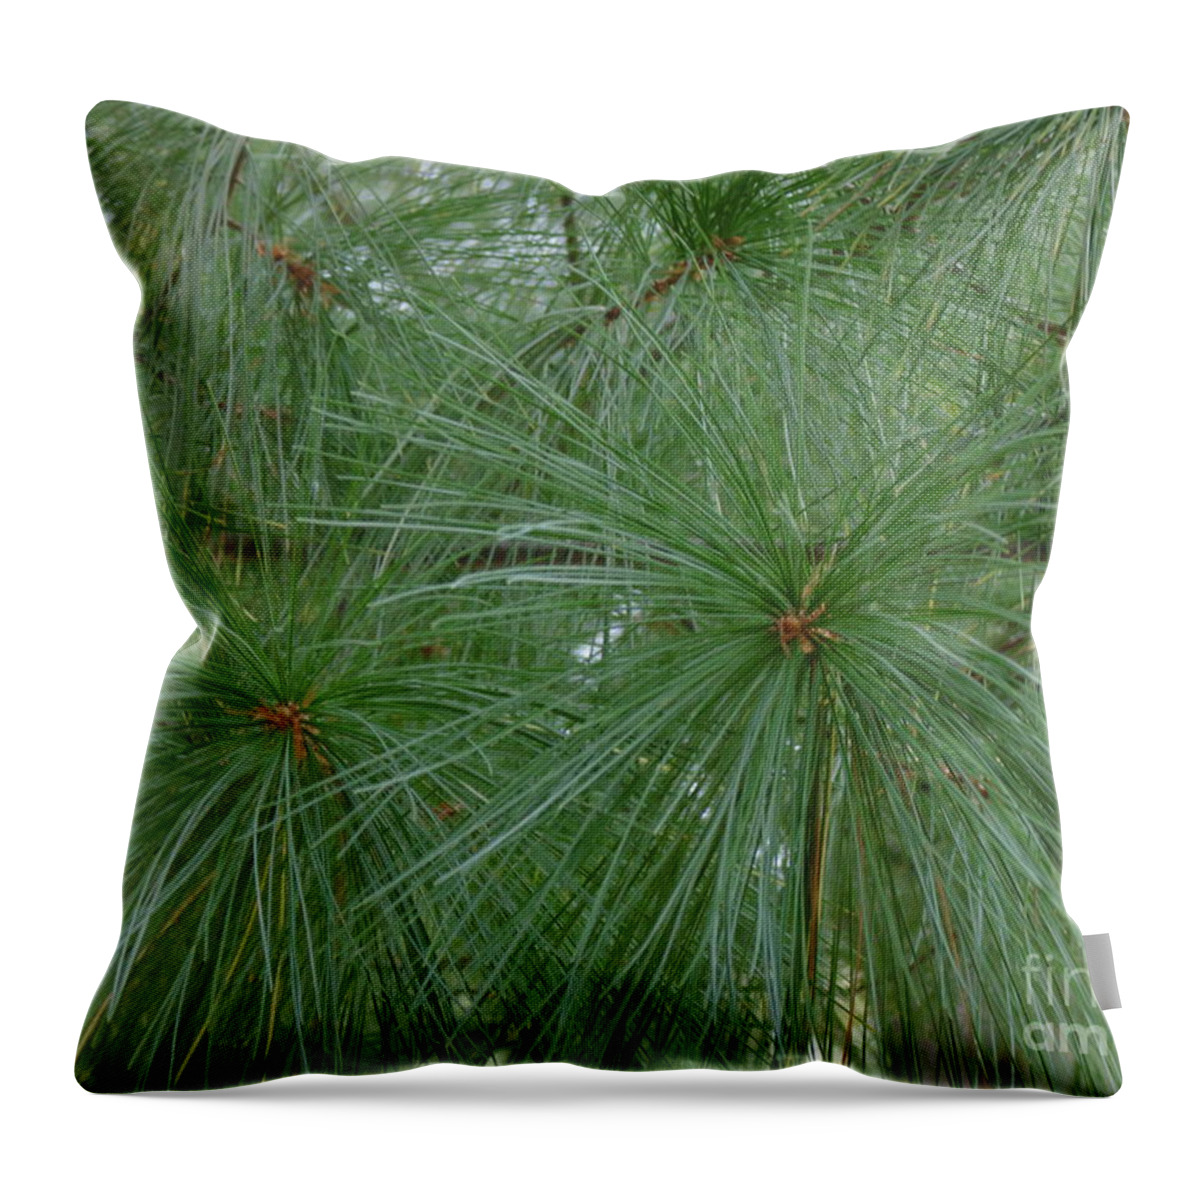 #pine Close Up #pine Needle Close #pine Tree Photograph #pine Needle Design #pine Needle Photograph Throw Pillow featuring the photograph Pine Needles by Daun Soden-Greene